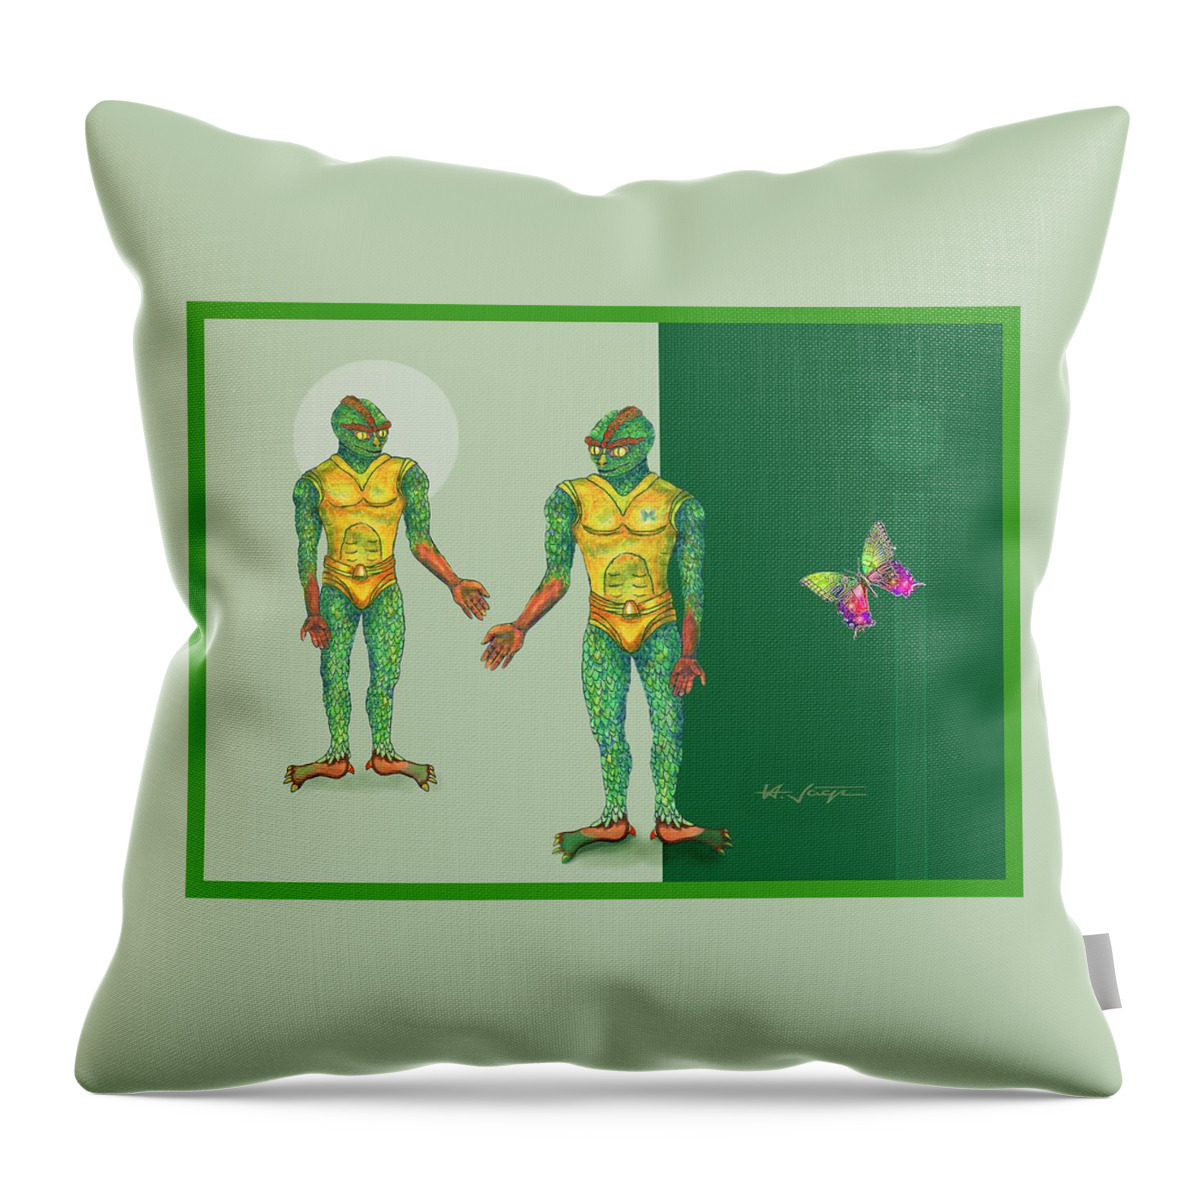 Imagination Throw Pillow featuring the painting Imagine. . . by Hartmut Jager